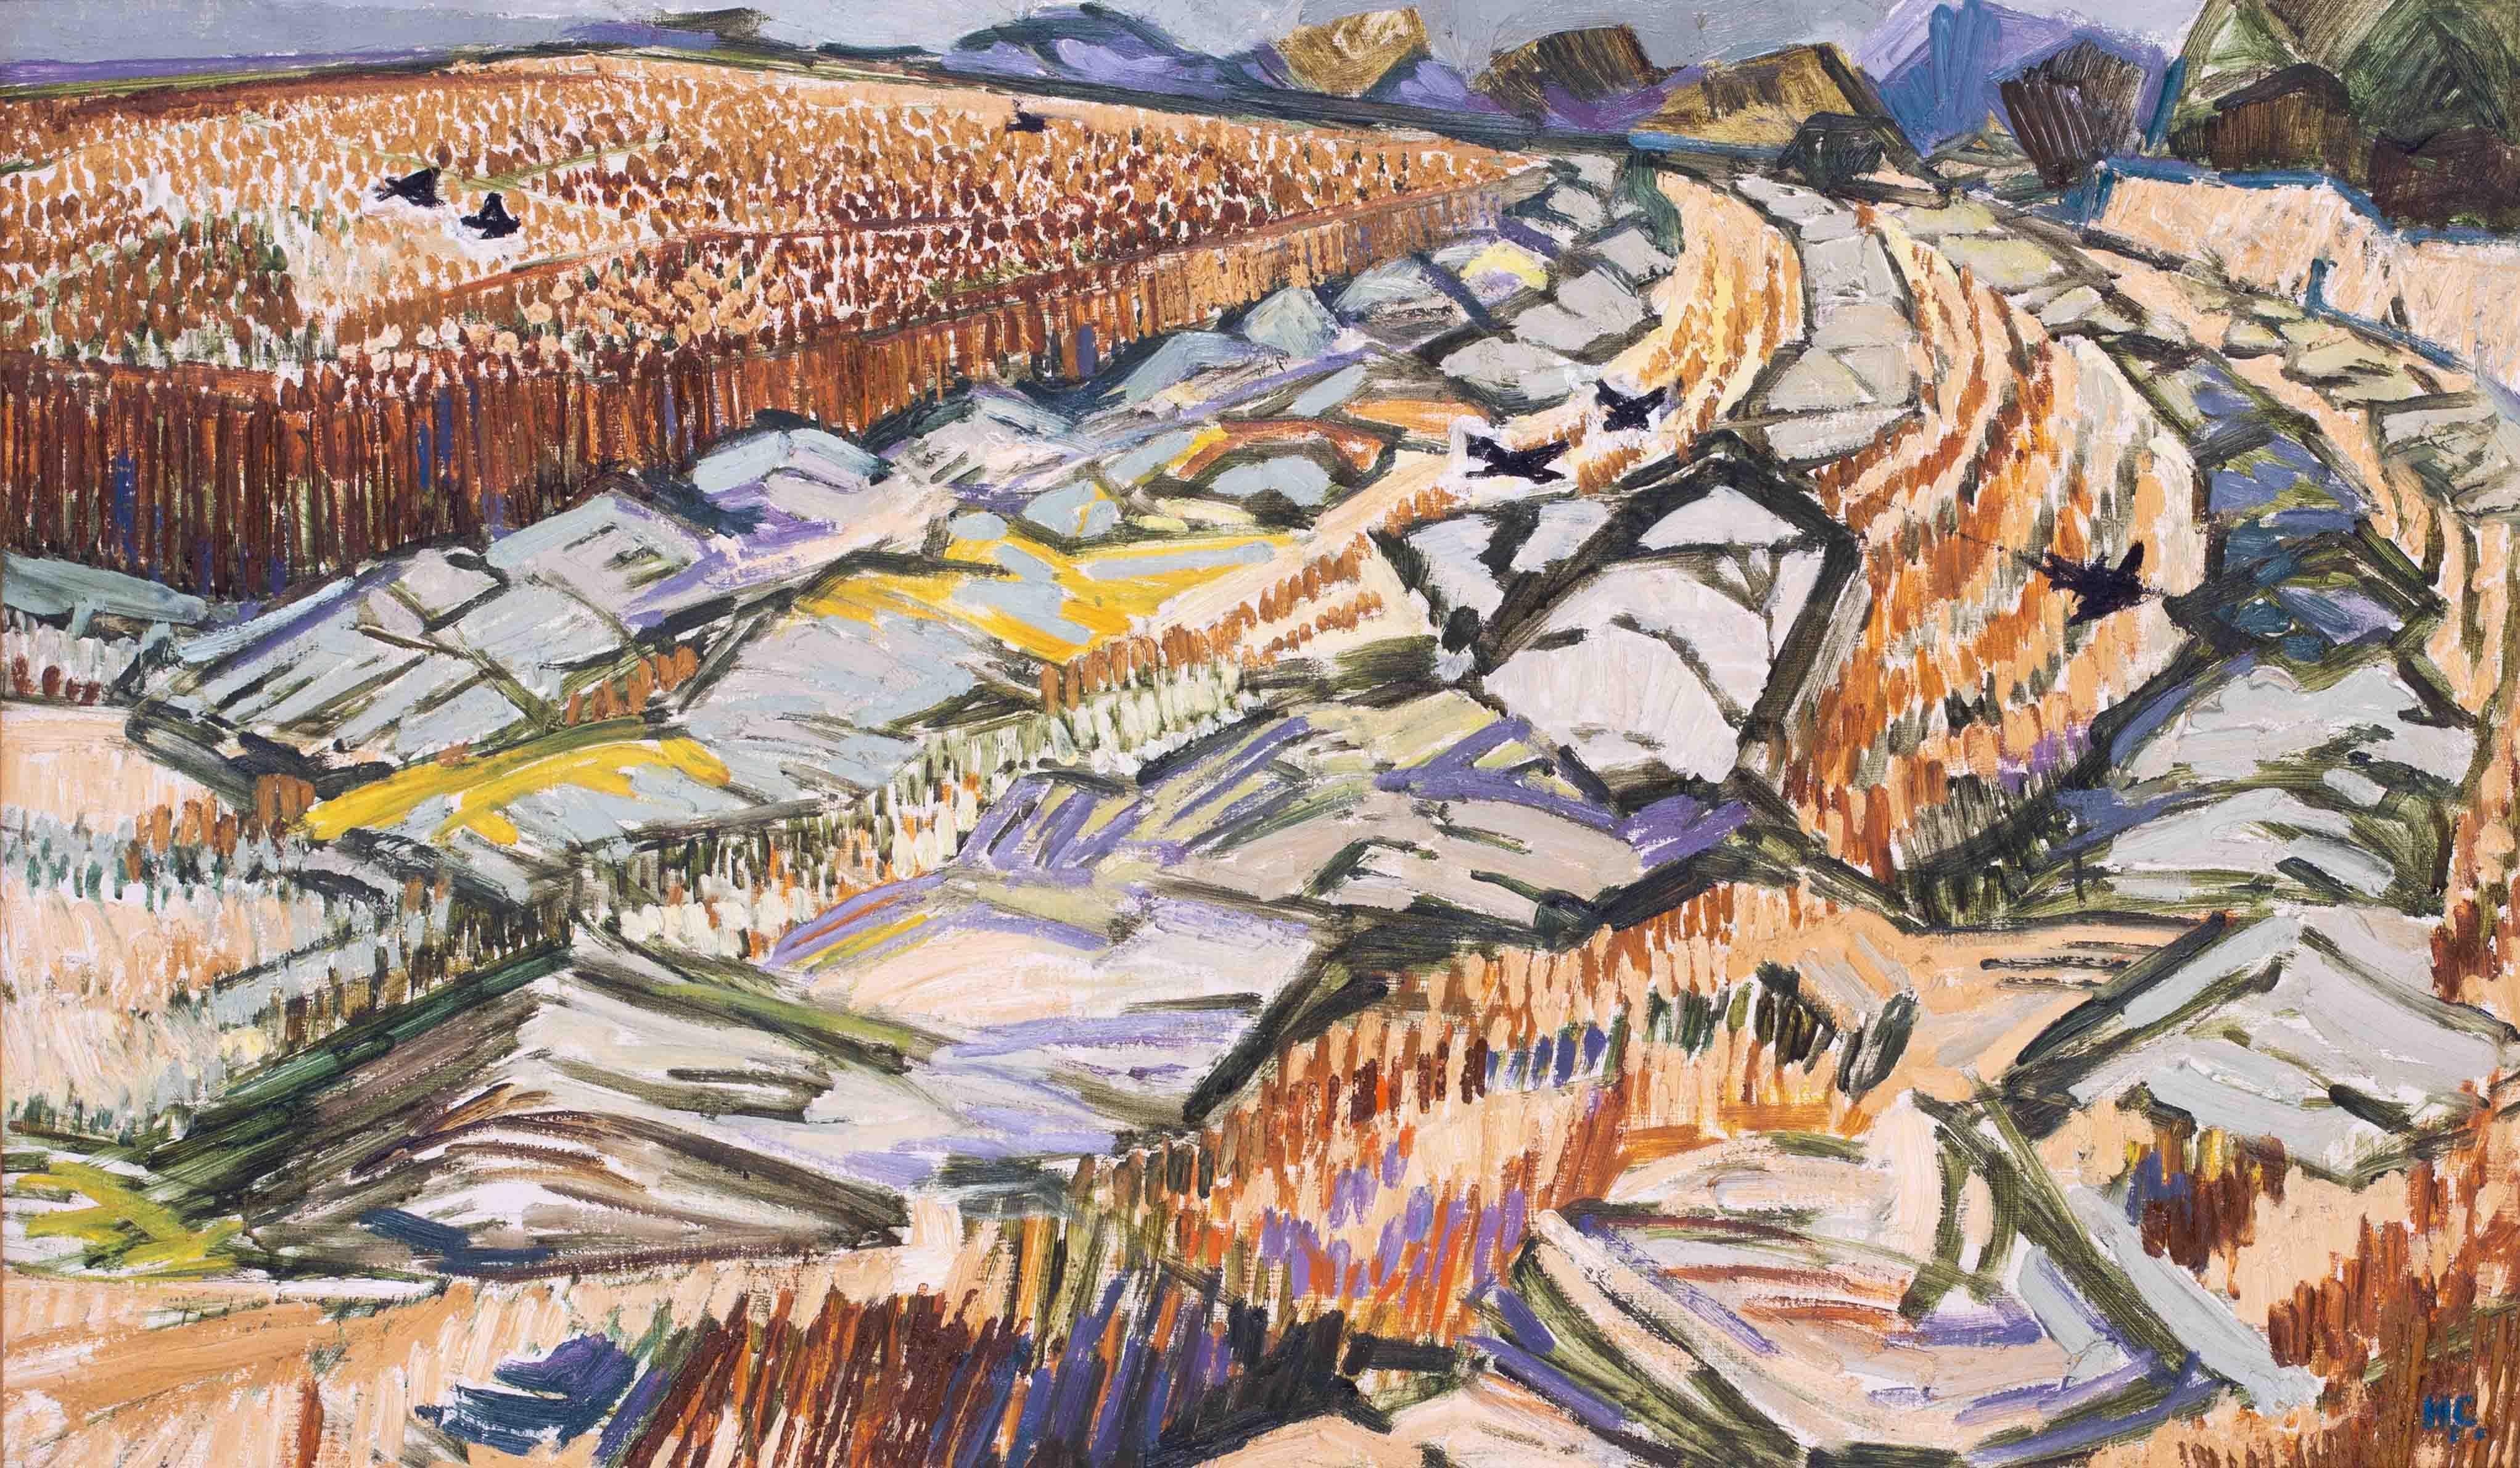 British 20th Century oil painting 'Harvest on the Causse' by Hugh Cronin - Painting by Hugh Cronyn